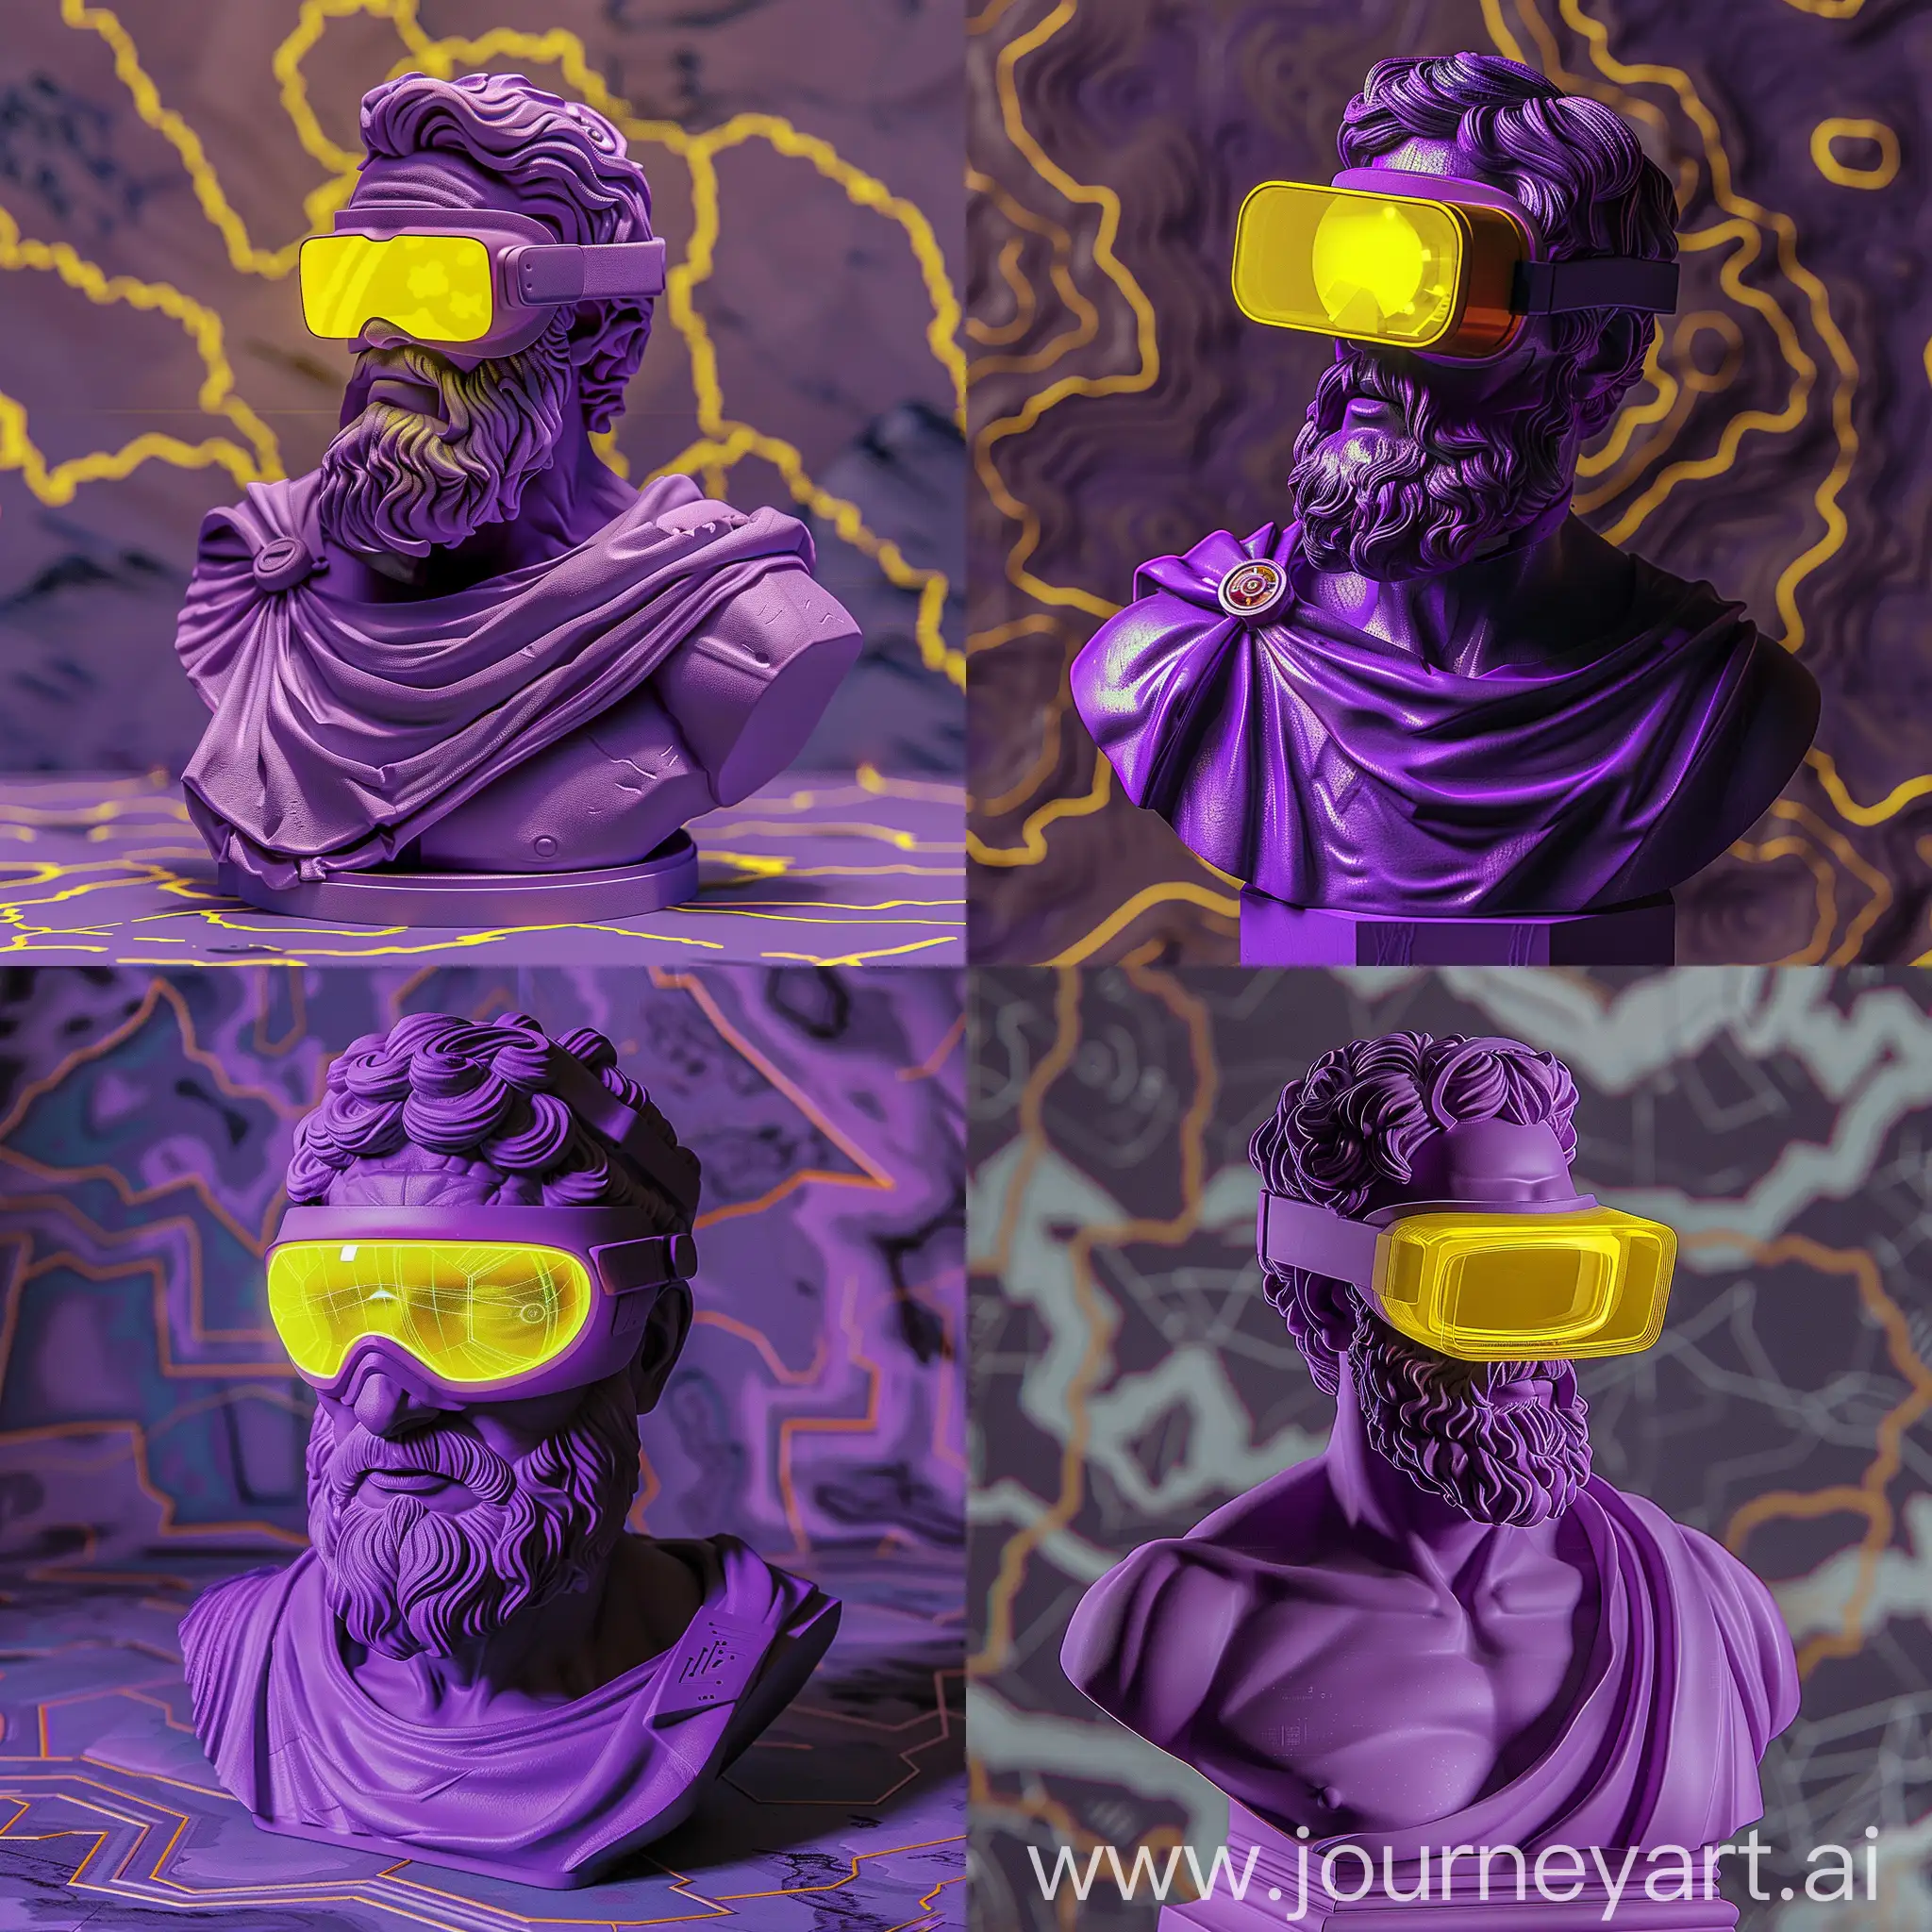 Greek-Philosopher-Sculpture-with-Cyberpunk-VR-Glasses-in-Cinematic-Pose